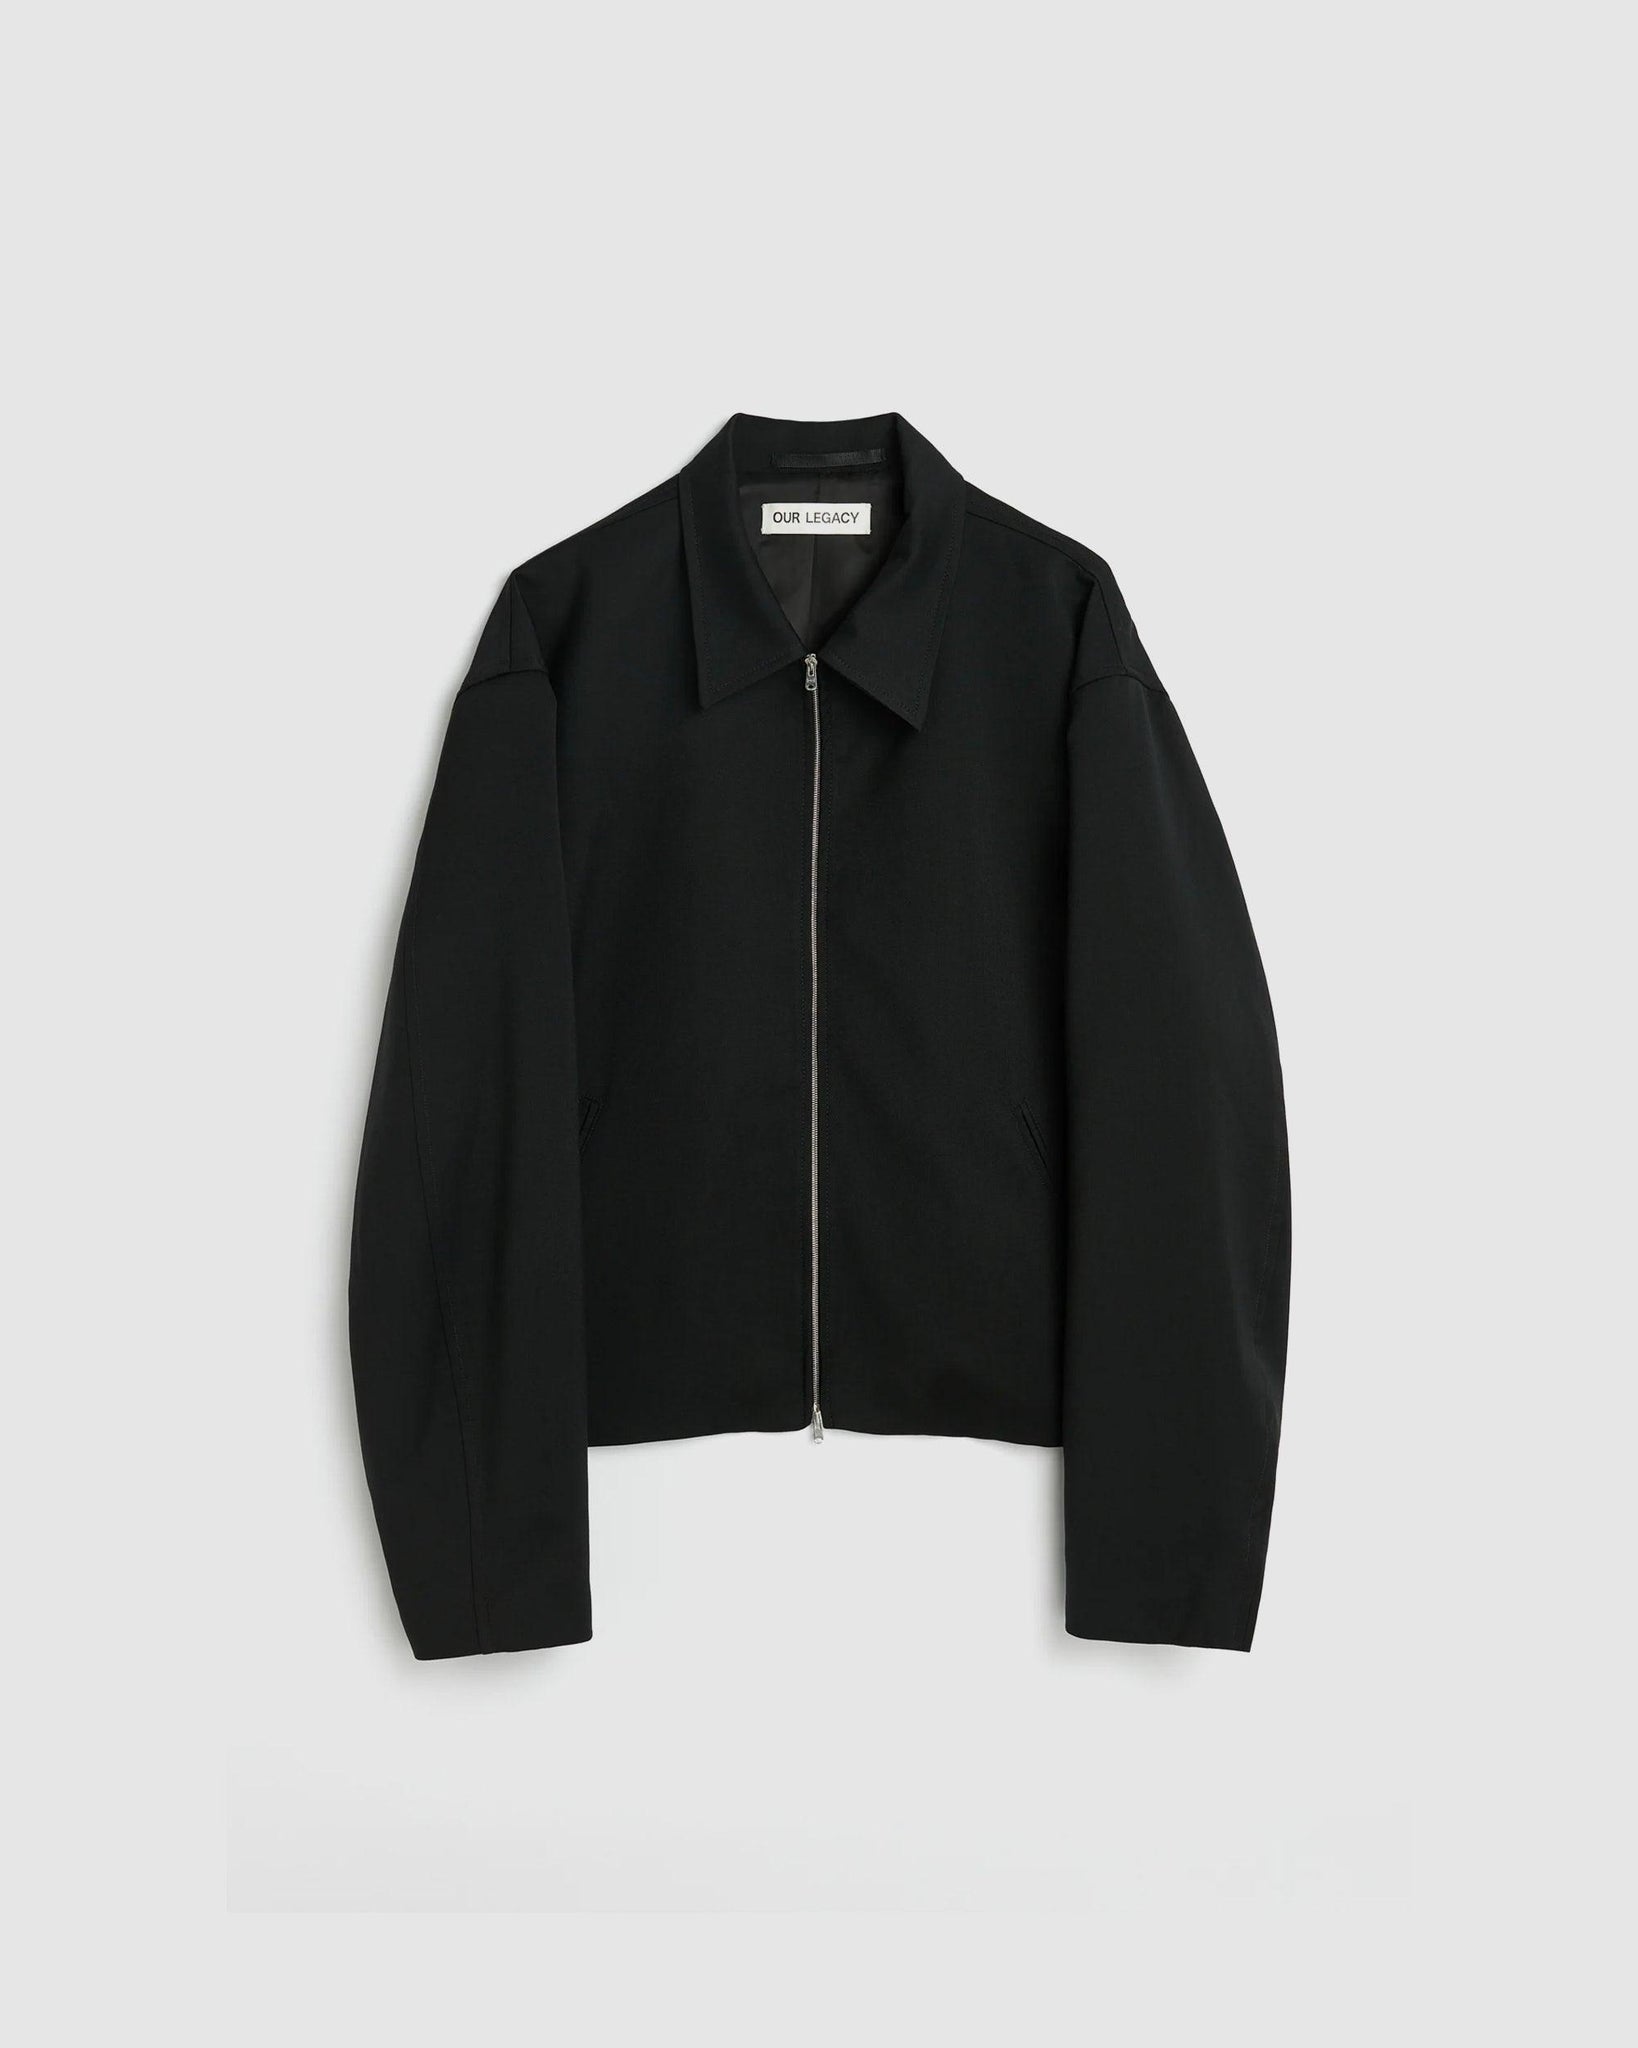 Mini Jacket Black Virgin Wool - {{ collection.title }} - Chinatown Country Club 